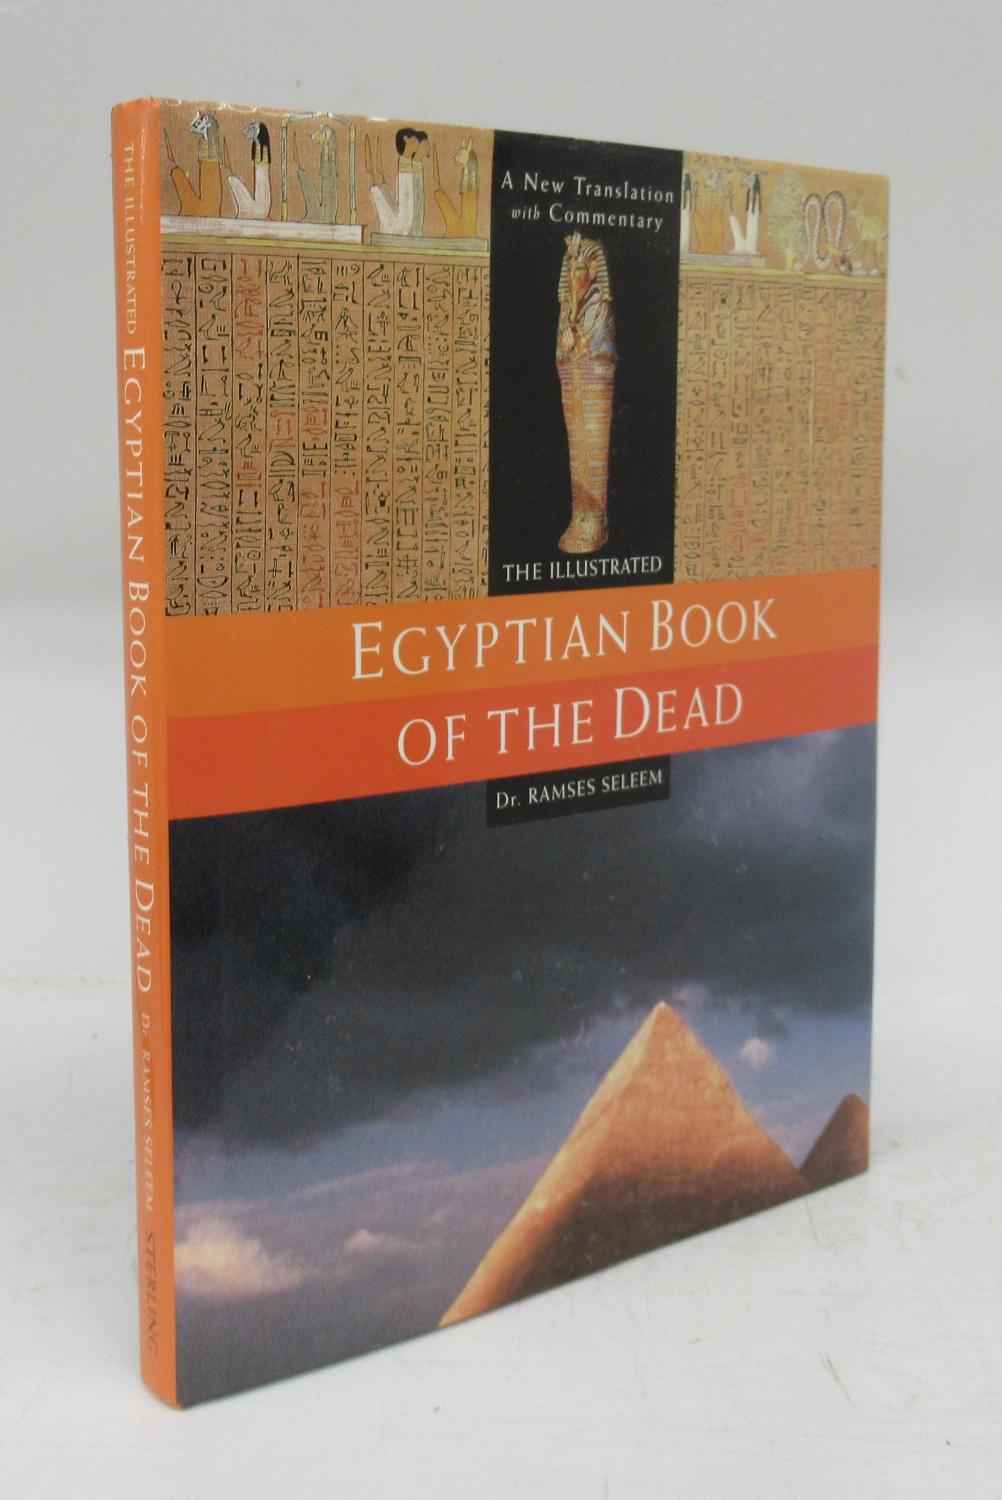 The Illustrated Egyptian Book of the Dead: A New Translation with Commentary - SELEEN, Dr. Ramses